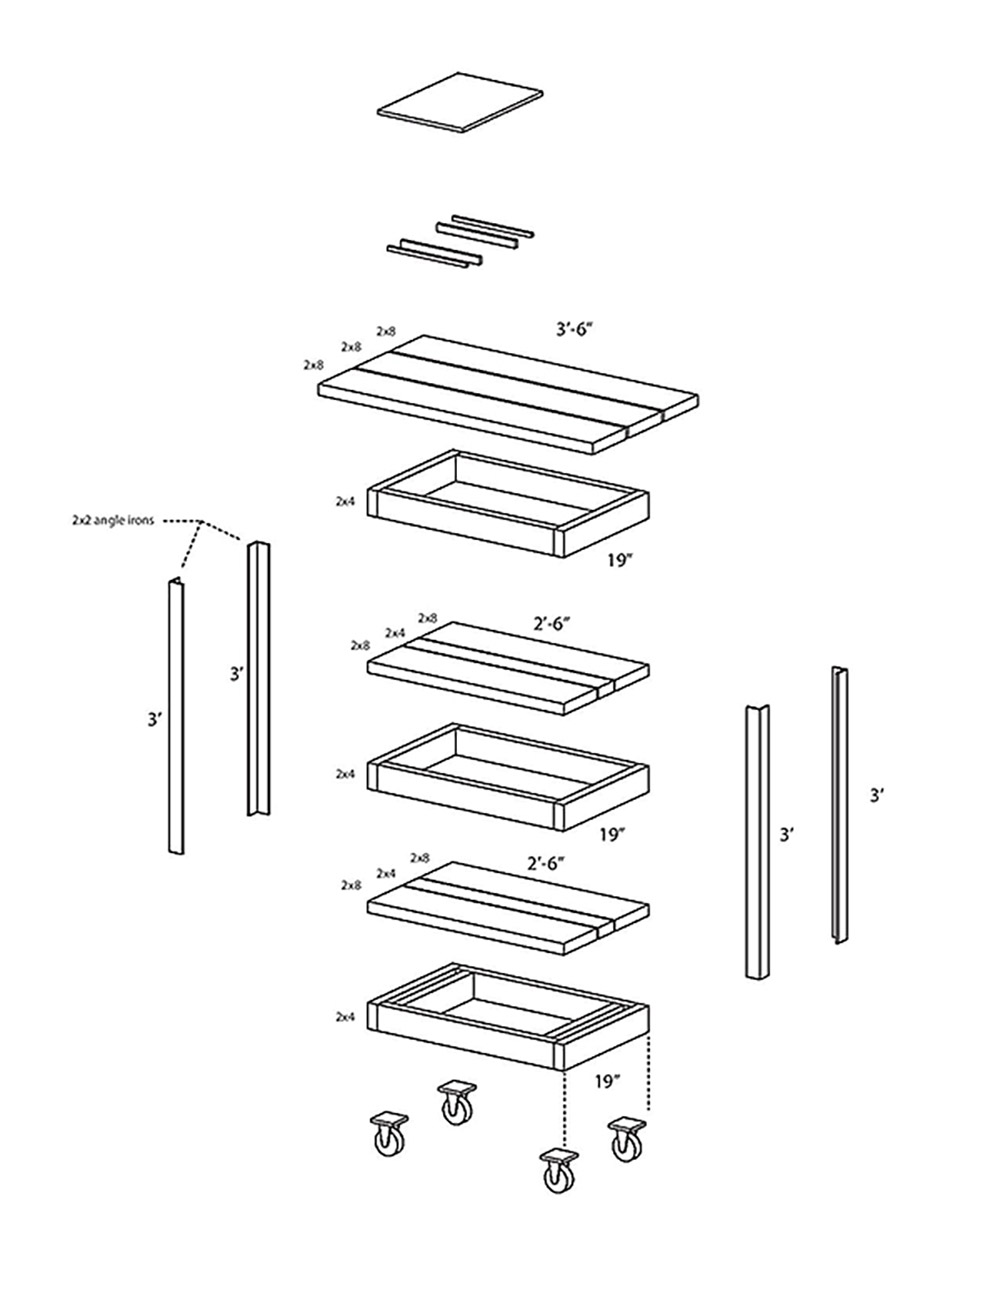 A diagram showing the measurements of the sections for a DIY grilling cart with wheels.